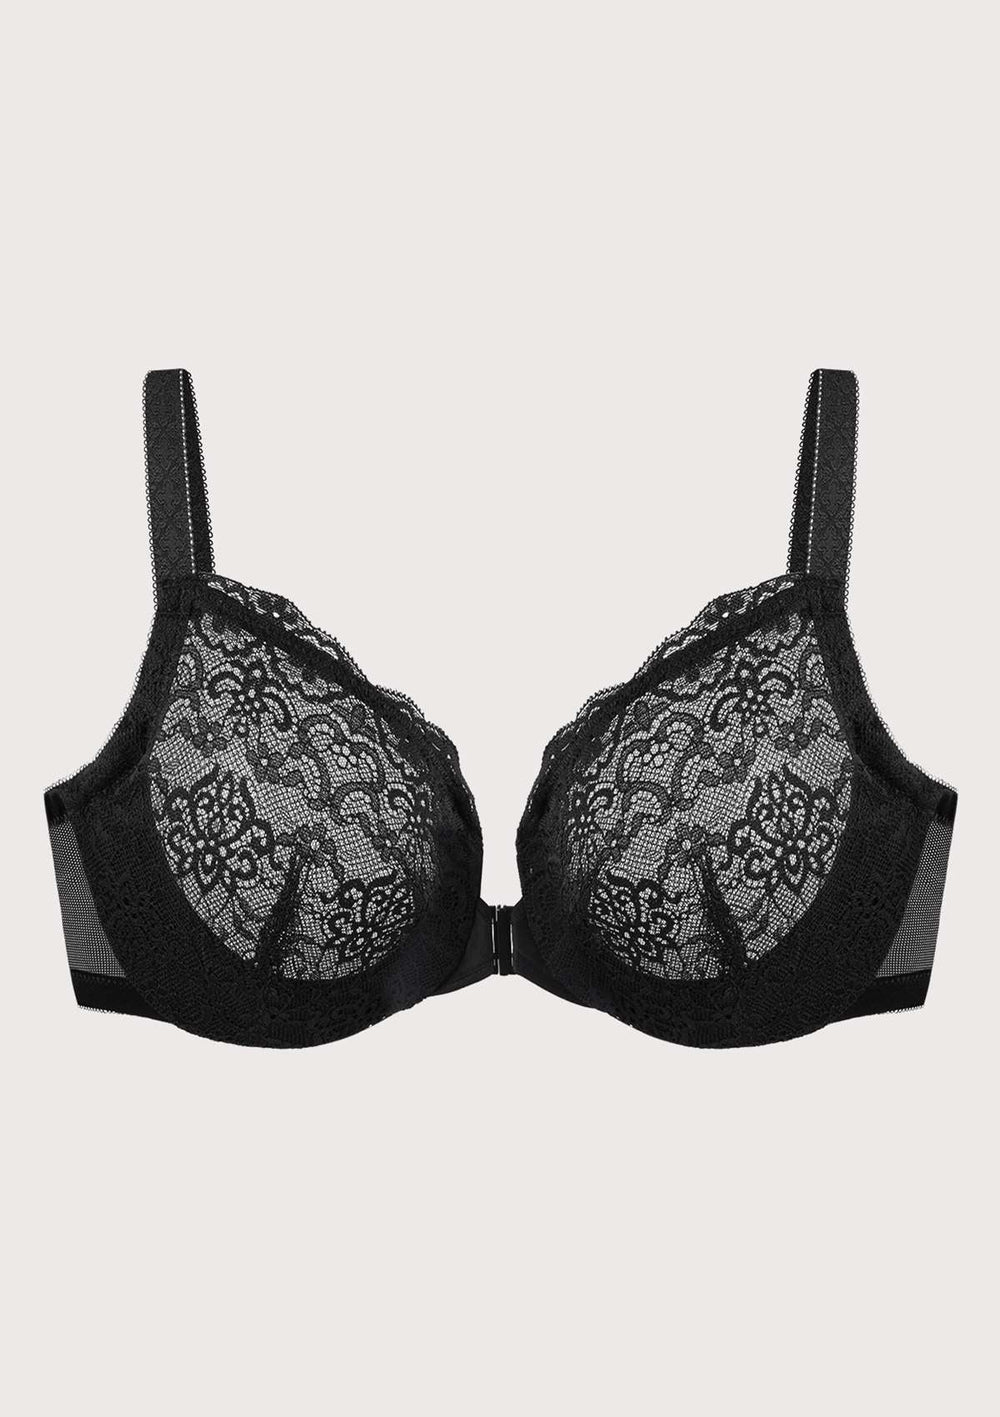 1Pc Women Lace Bralette Padded Wireless Bra Floral Lace Bra Front Closure  Back Smoothing Demi Bra Lace Bras Push up Thin Soft Bra P-INK 8XL 